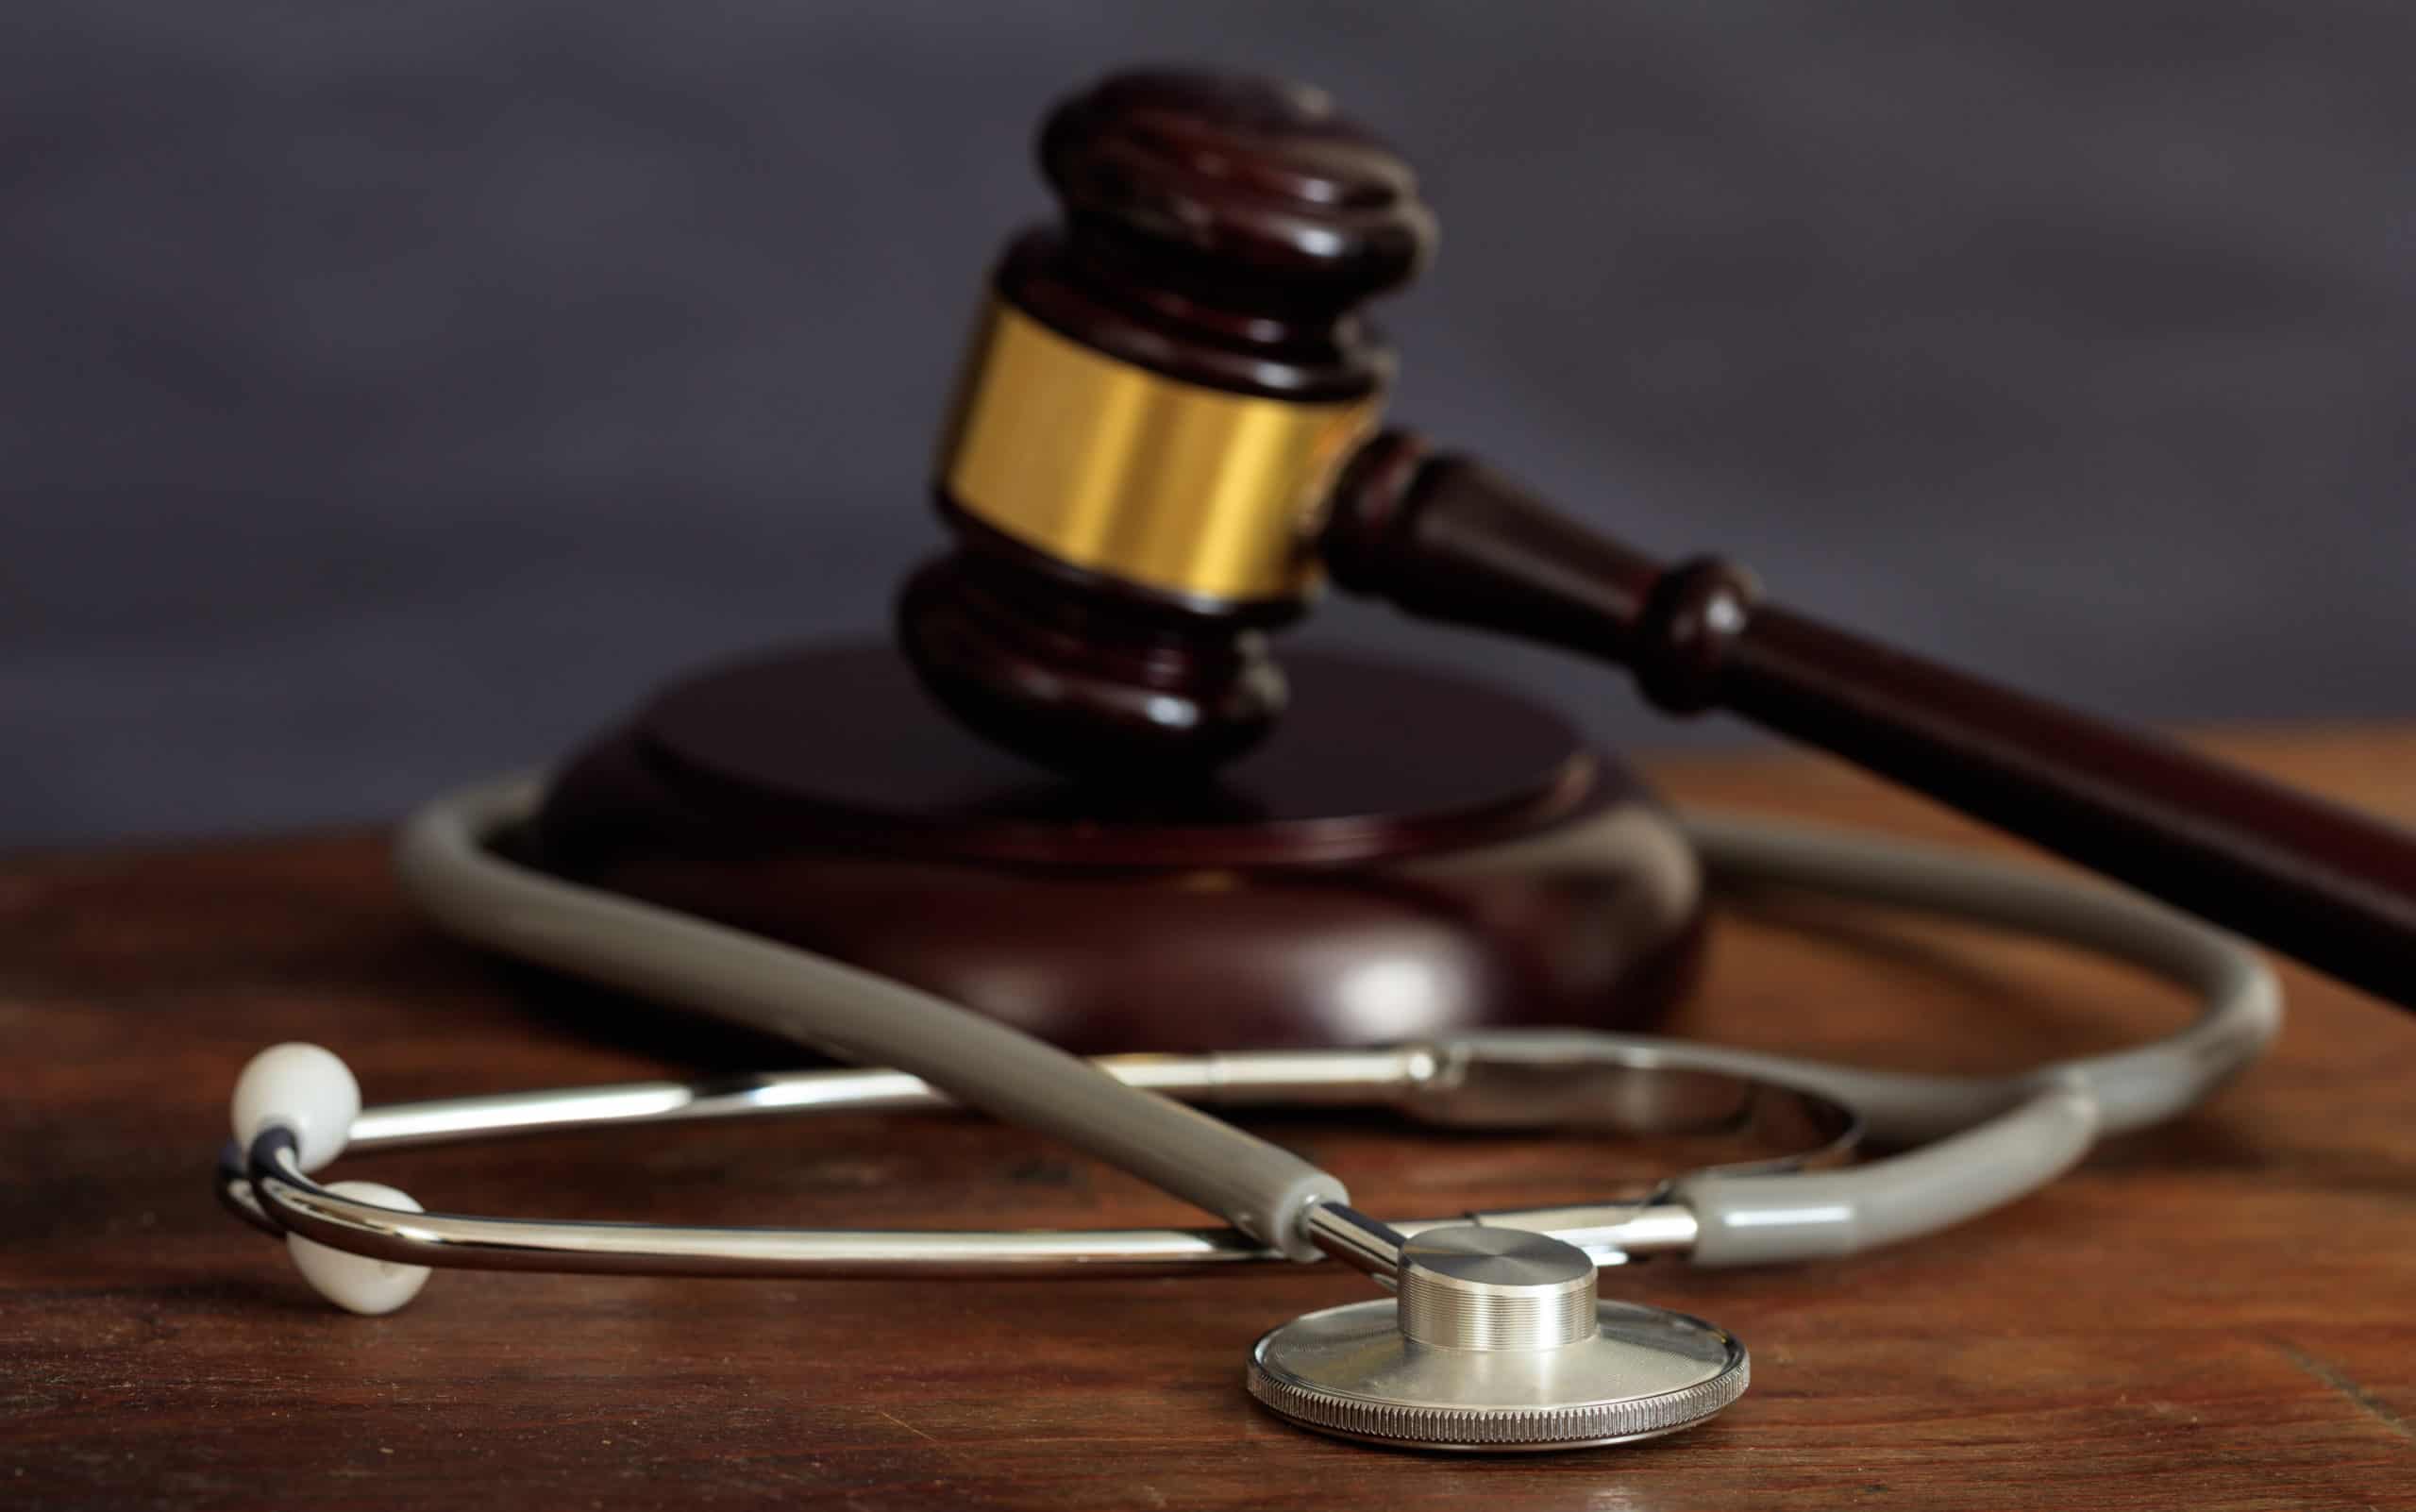 Law gavel and a stethoscope on a wooden desk, dark background